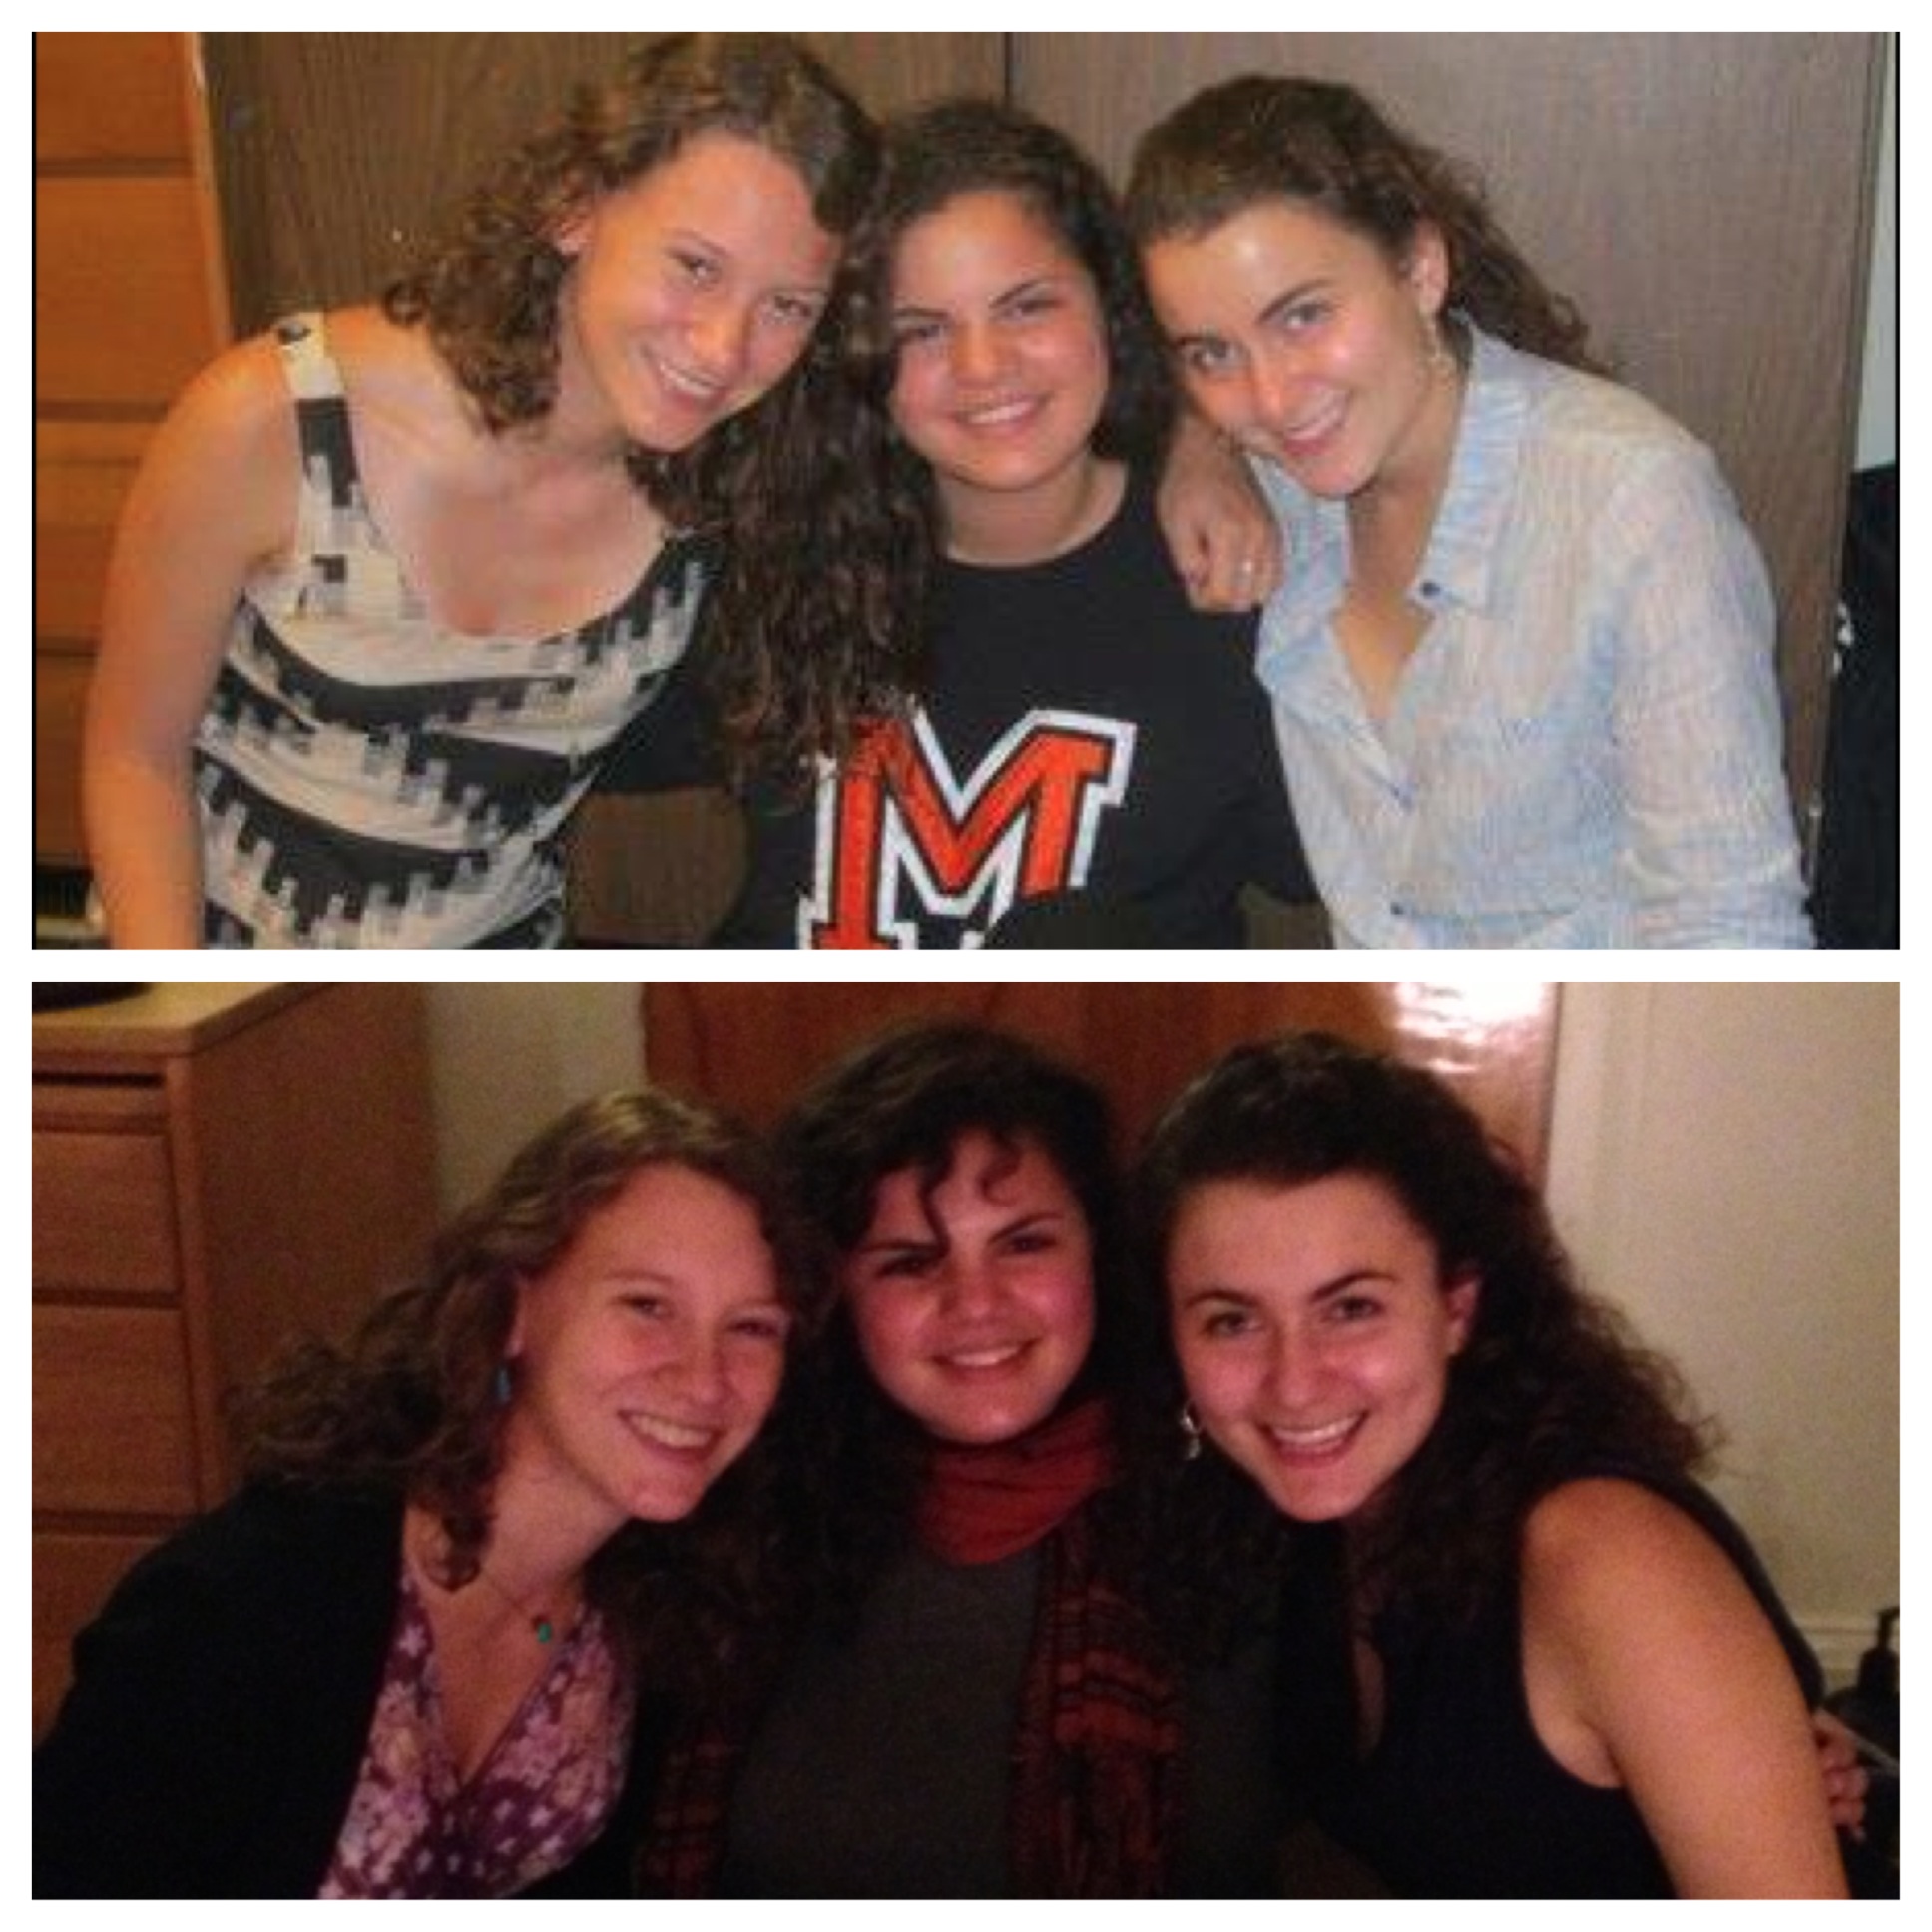 Marina and friends, 2012 and 2013